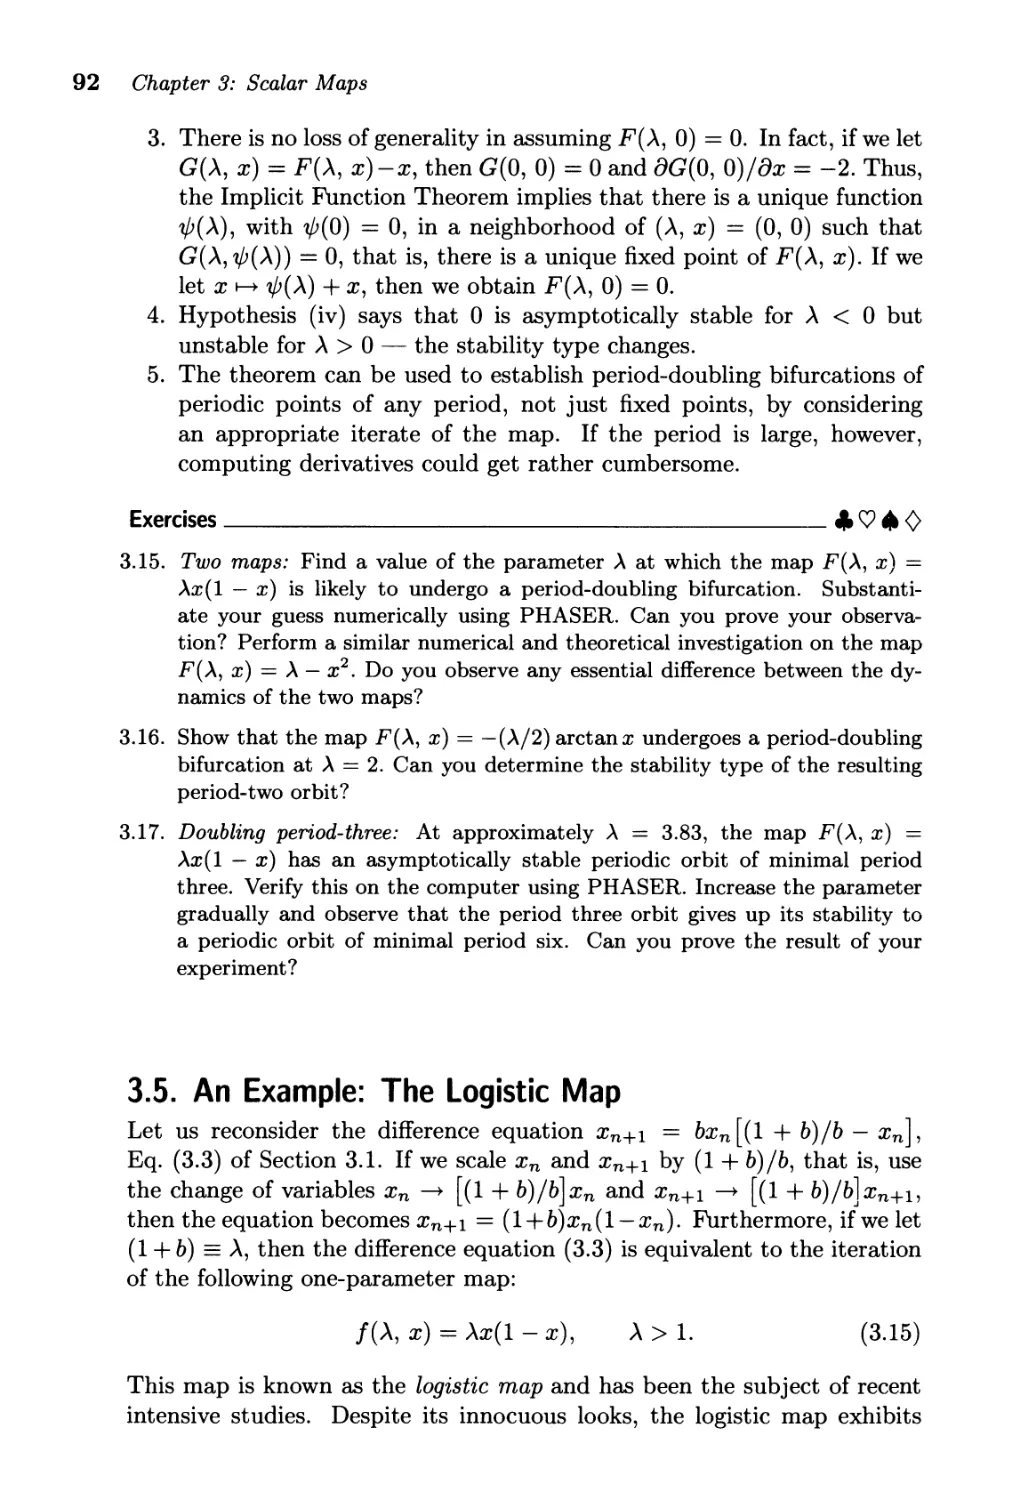 3.5. An Example: The Logistic Map